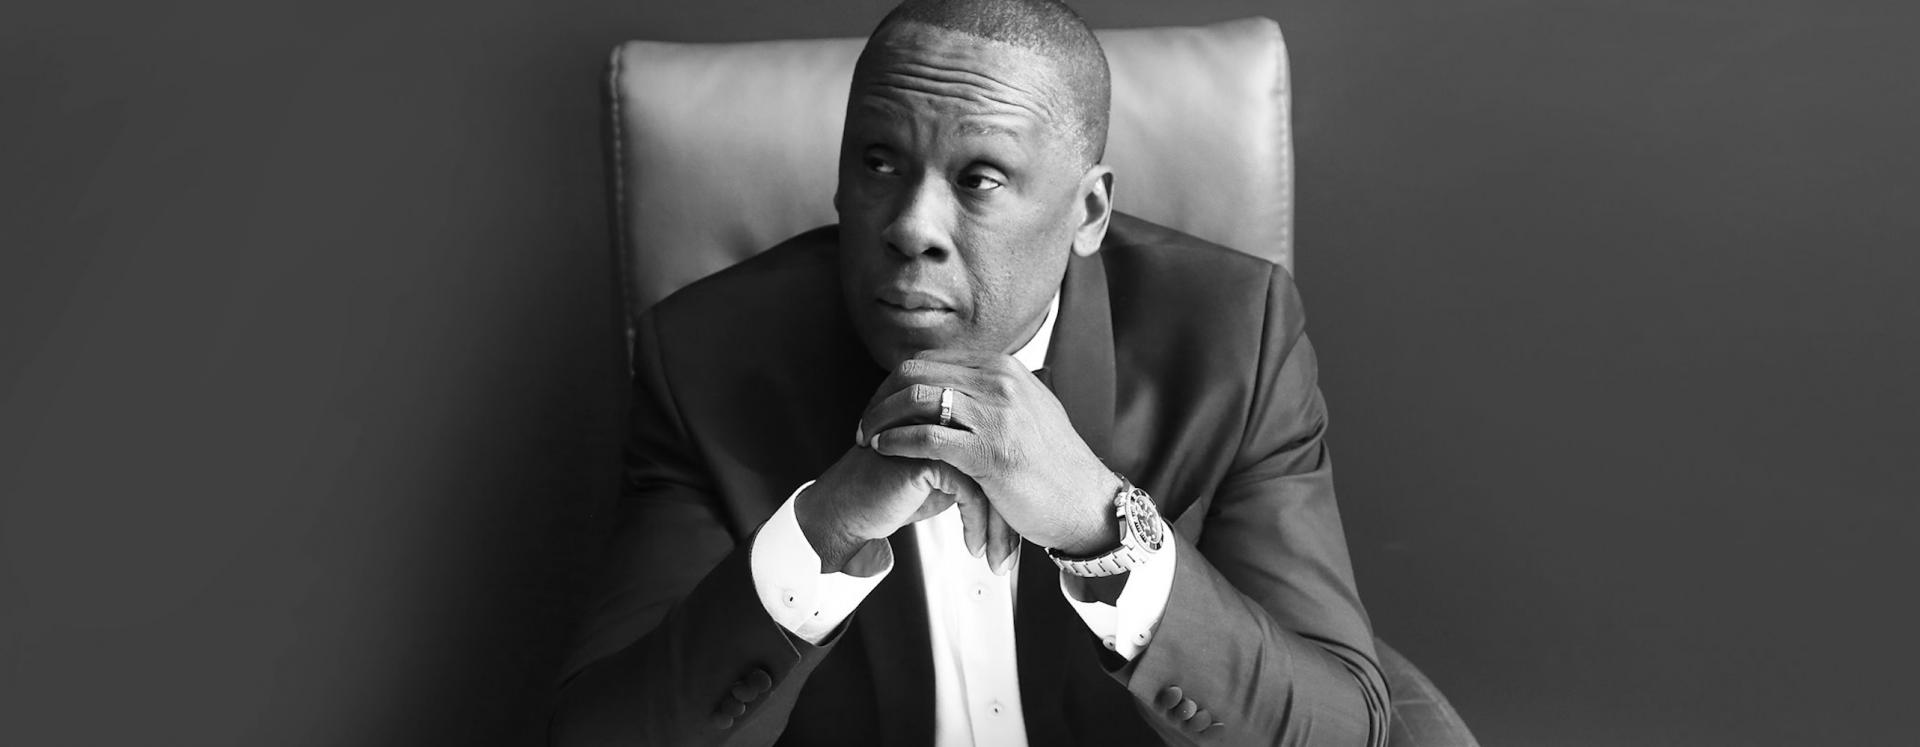 Black And White Photo Of Bruny Surin Sitting Down With Both Hands Under His Chin